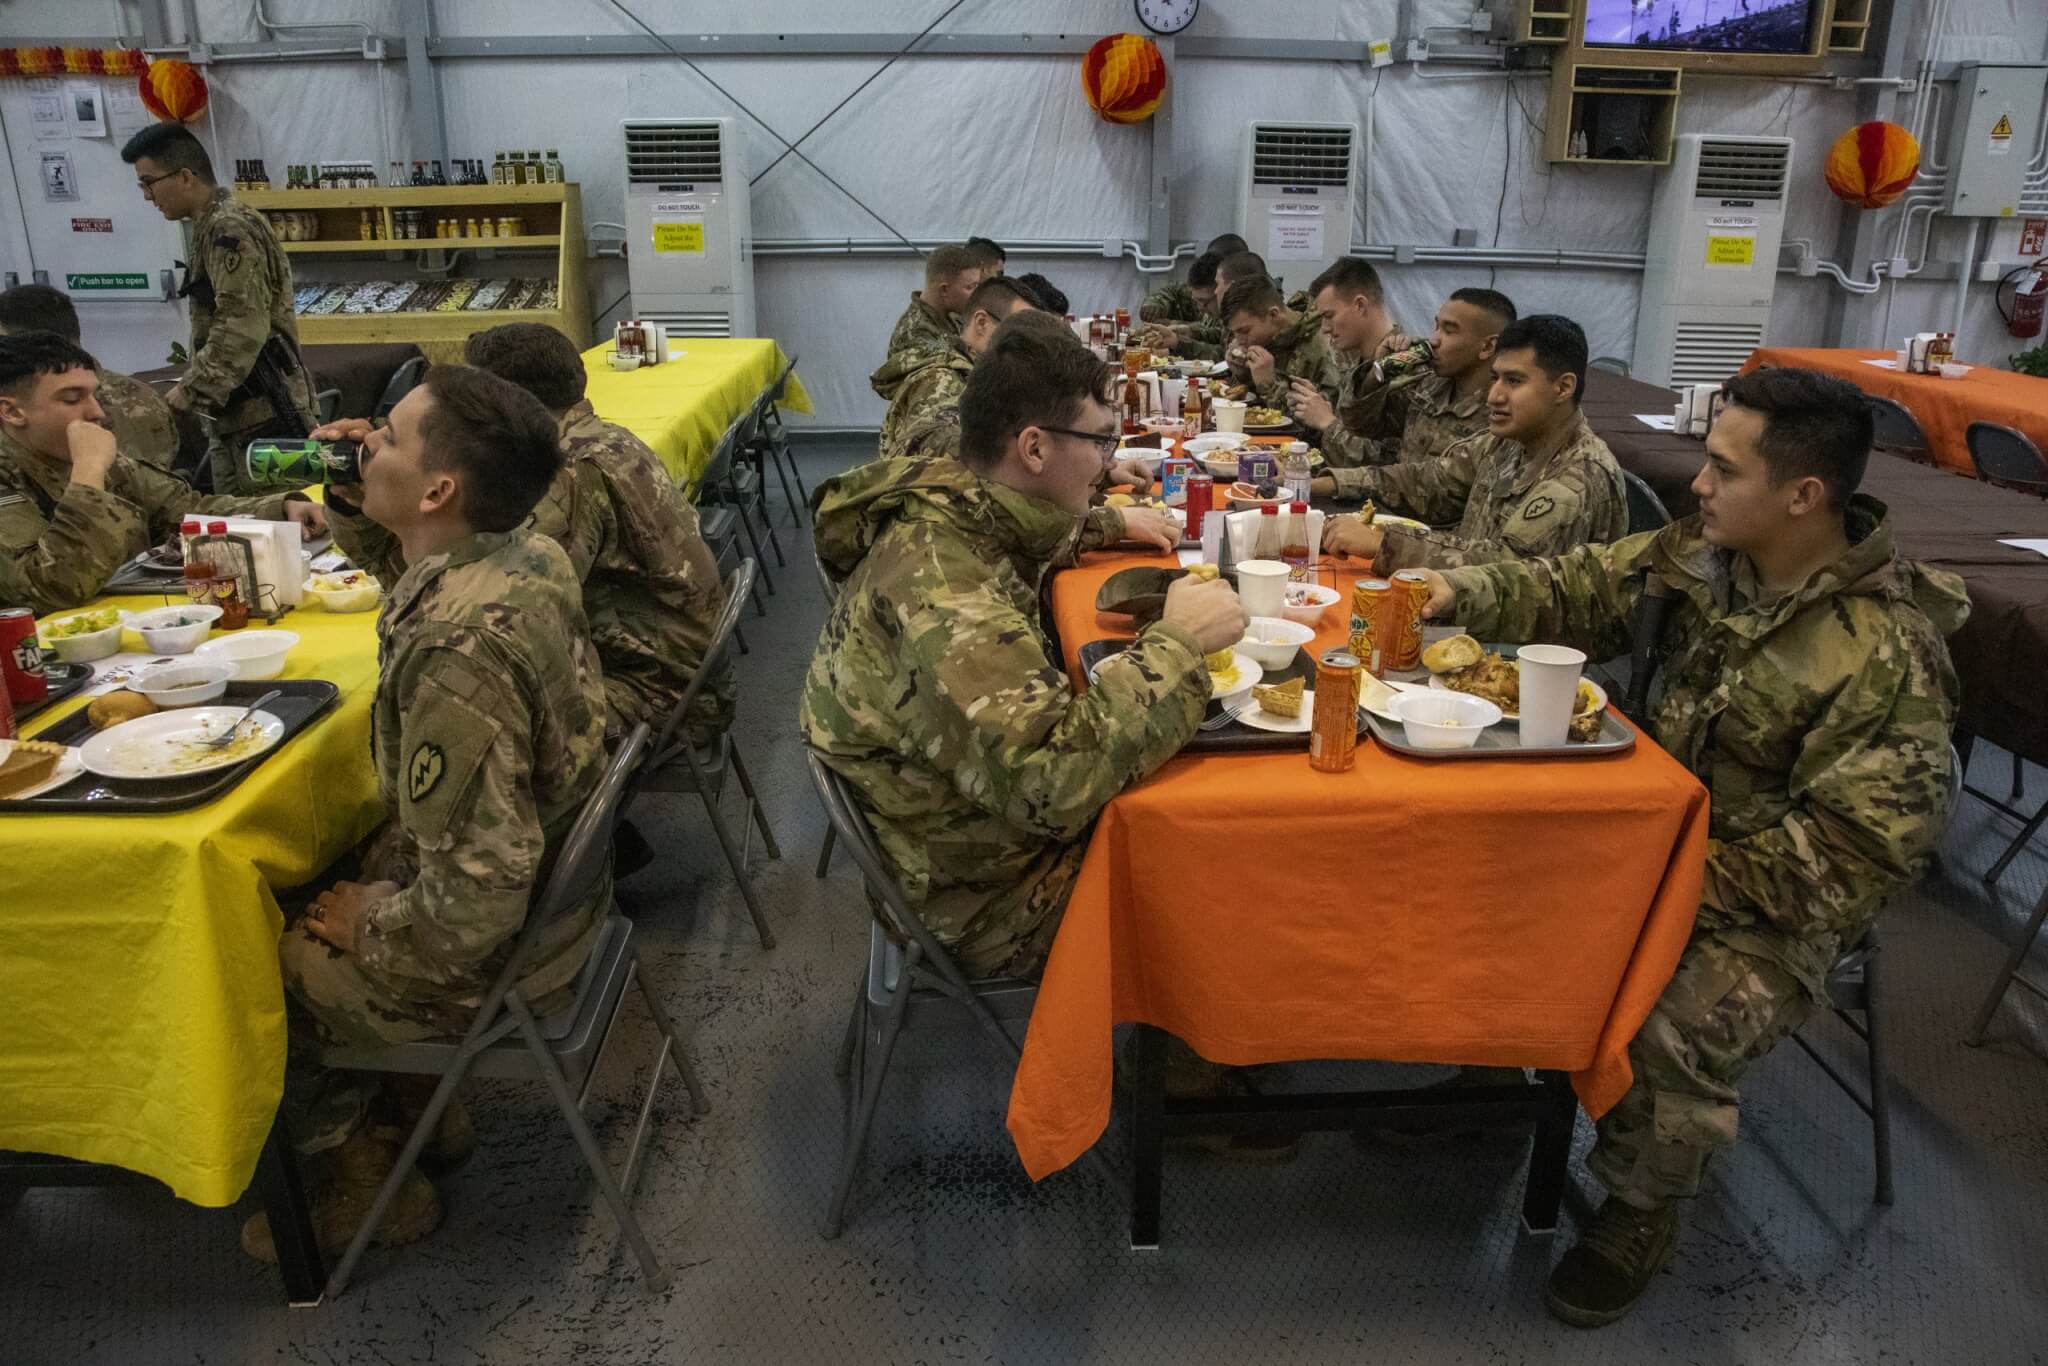 U.S. Army Soldiers celebrate Thanksgiving while deployed in support of Operation Inherent Resolve at Erbil Air Base, Iraq, Nov. 28, 2019. The Soldiers chose from a selection of Thanksgiving classics including turkey, mashed potatoes, and green bean casserole. (U.S. Army photo by Spc. Angel Ruszkiewicz)